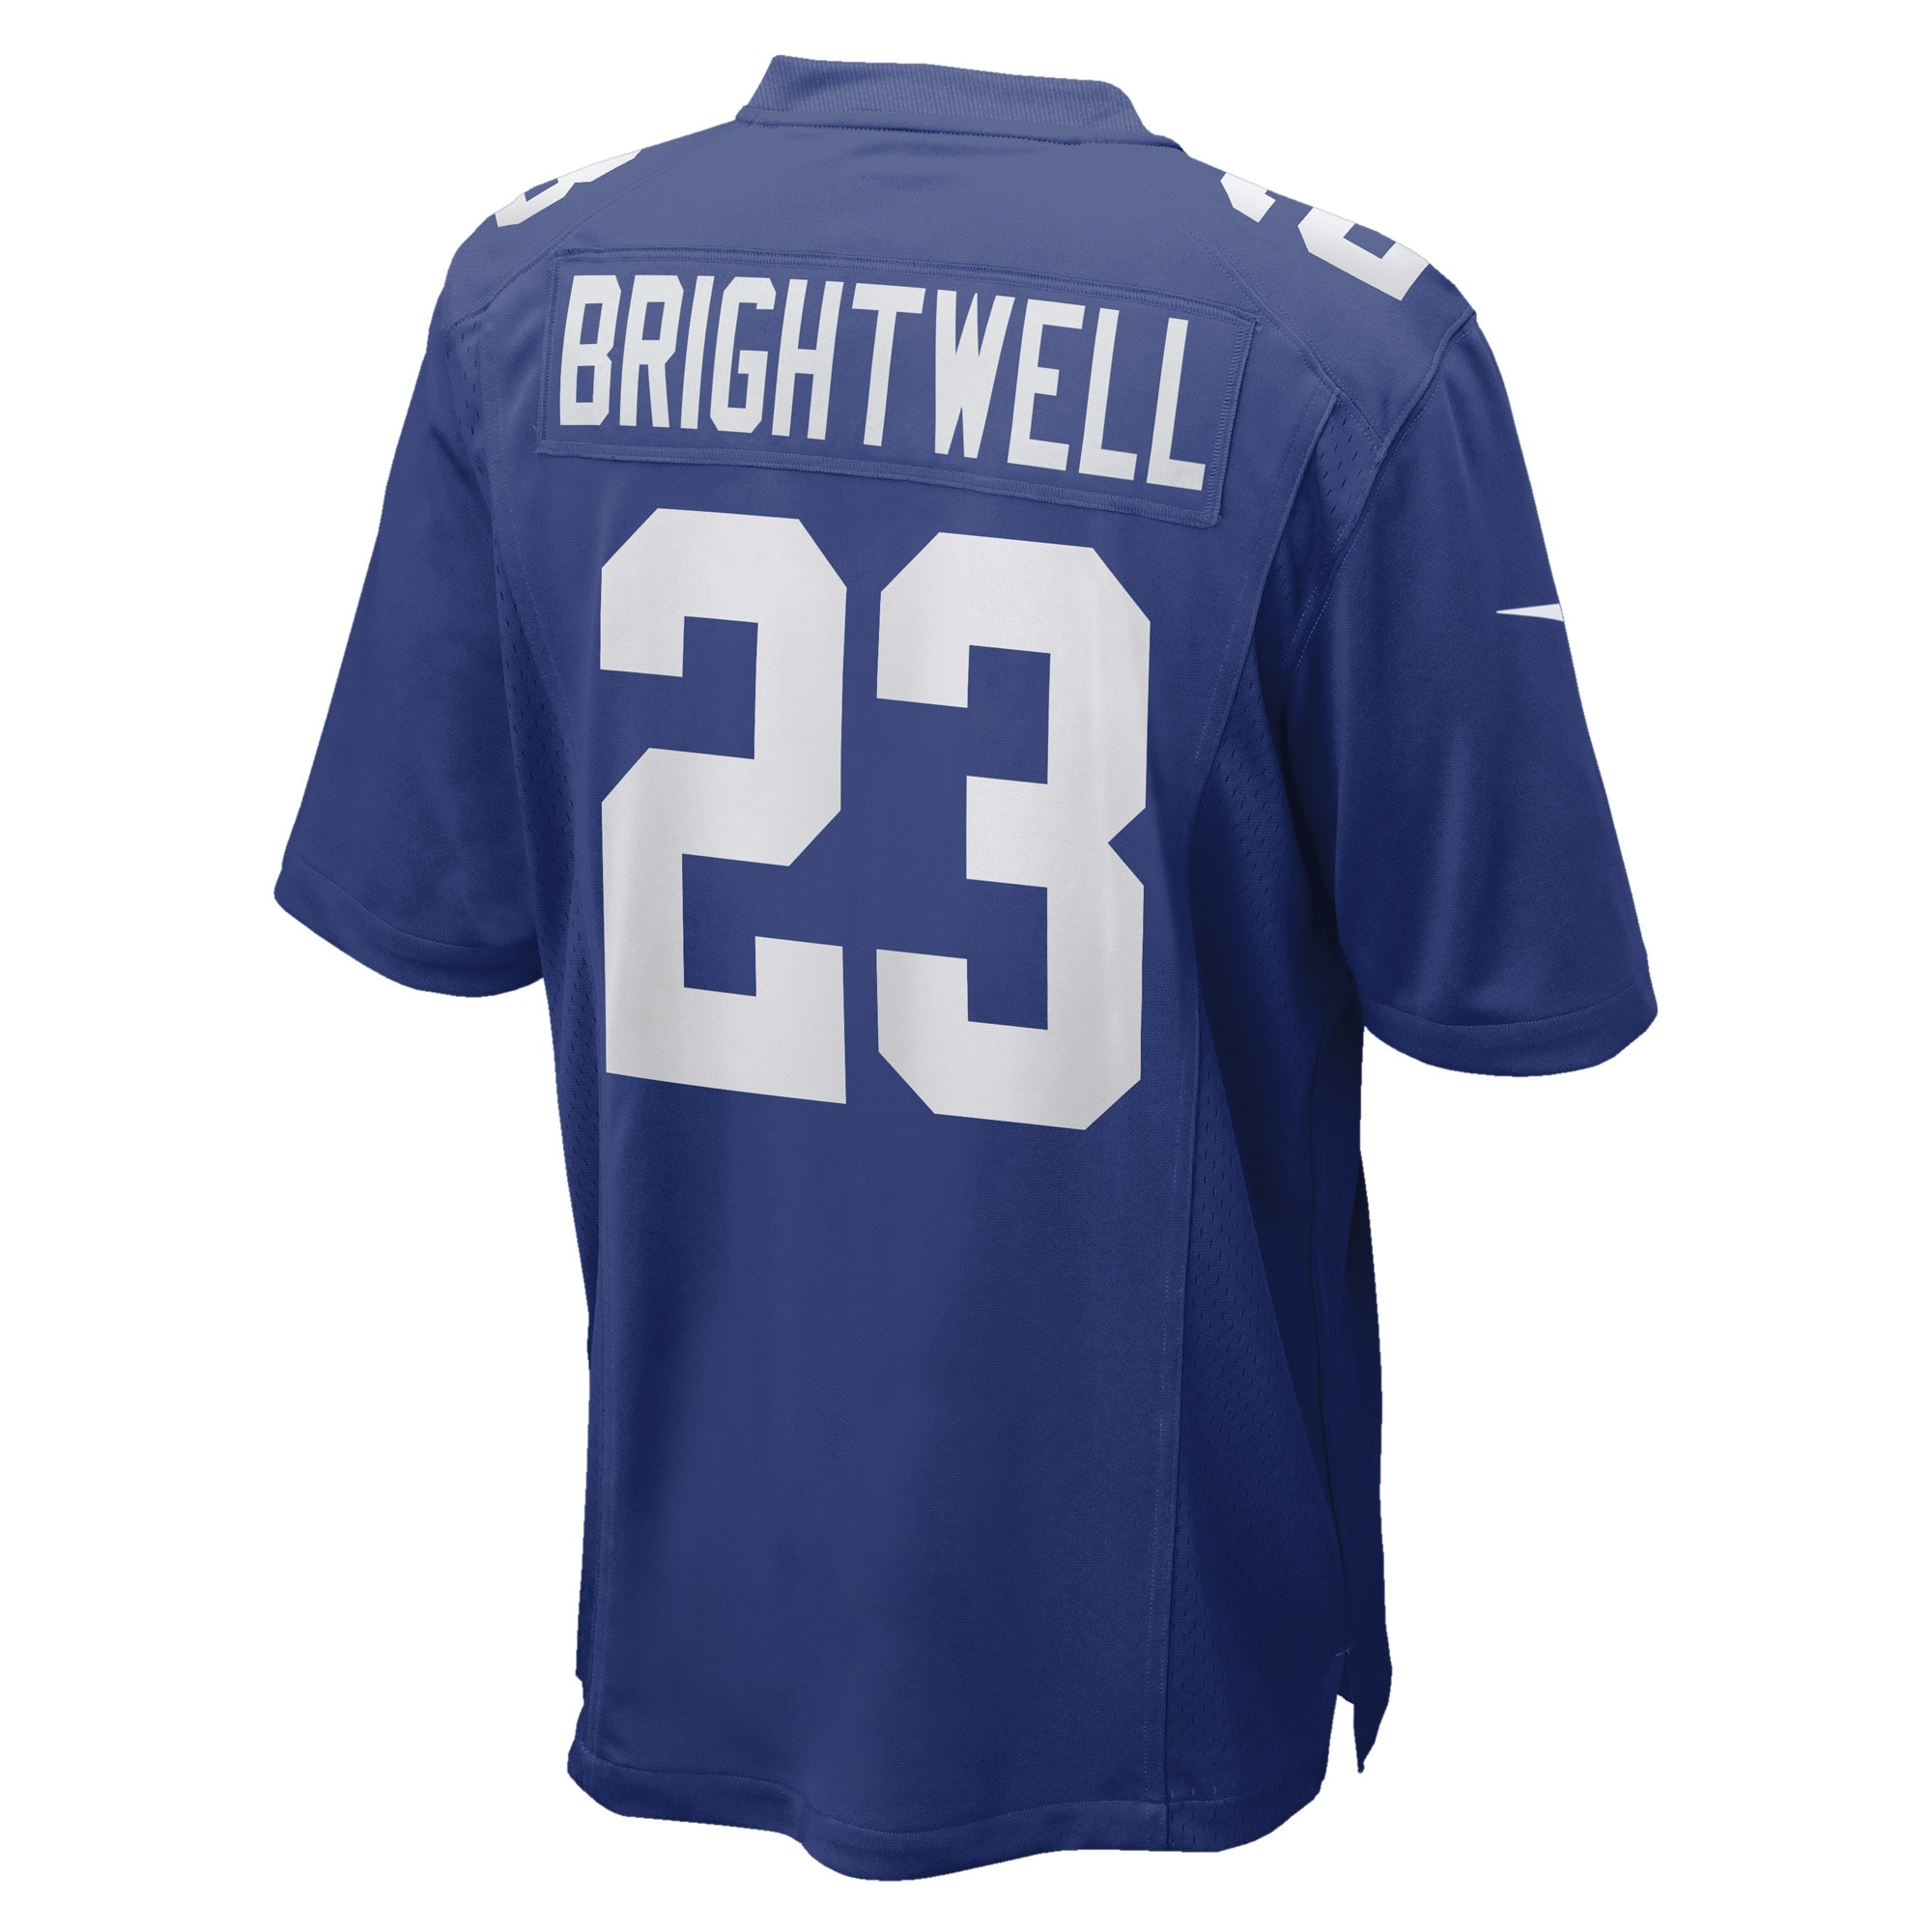 Men's New York Giants Jerseys Royal Gary Brightwell Team Game Player Style